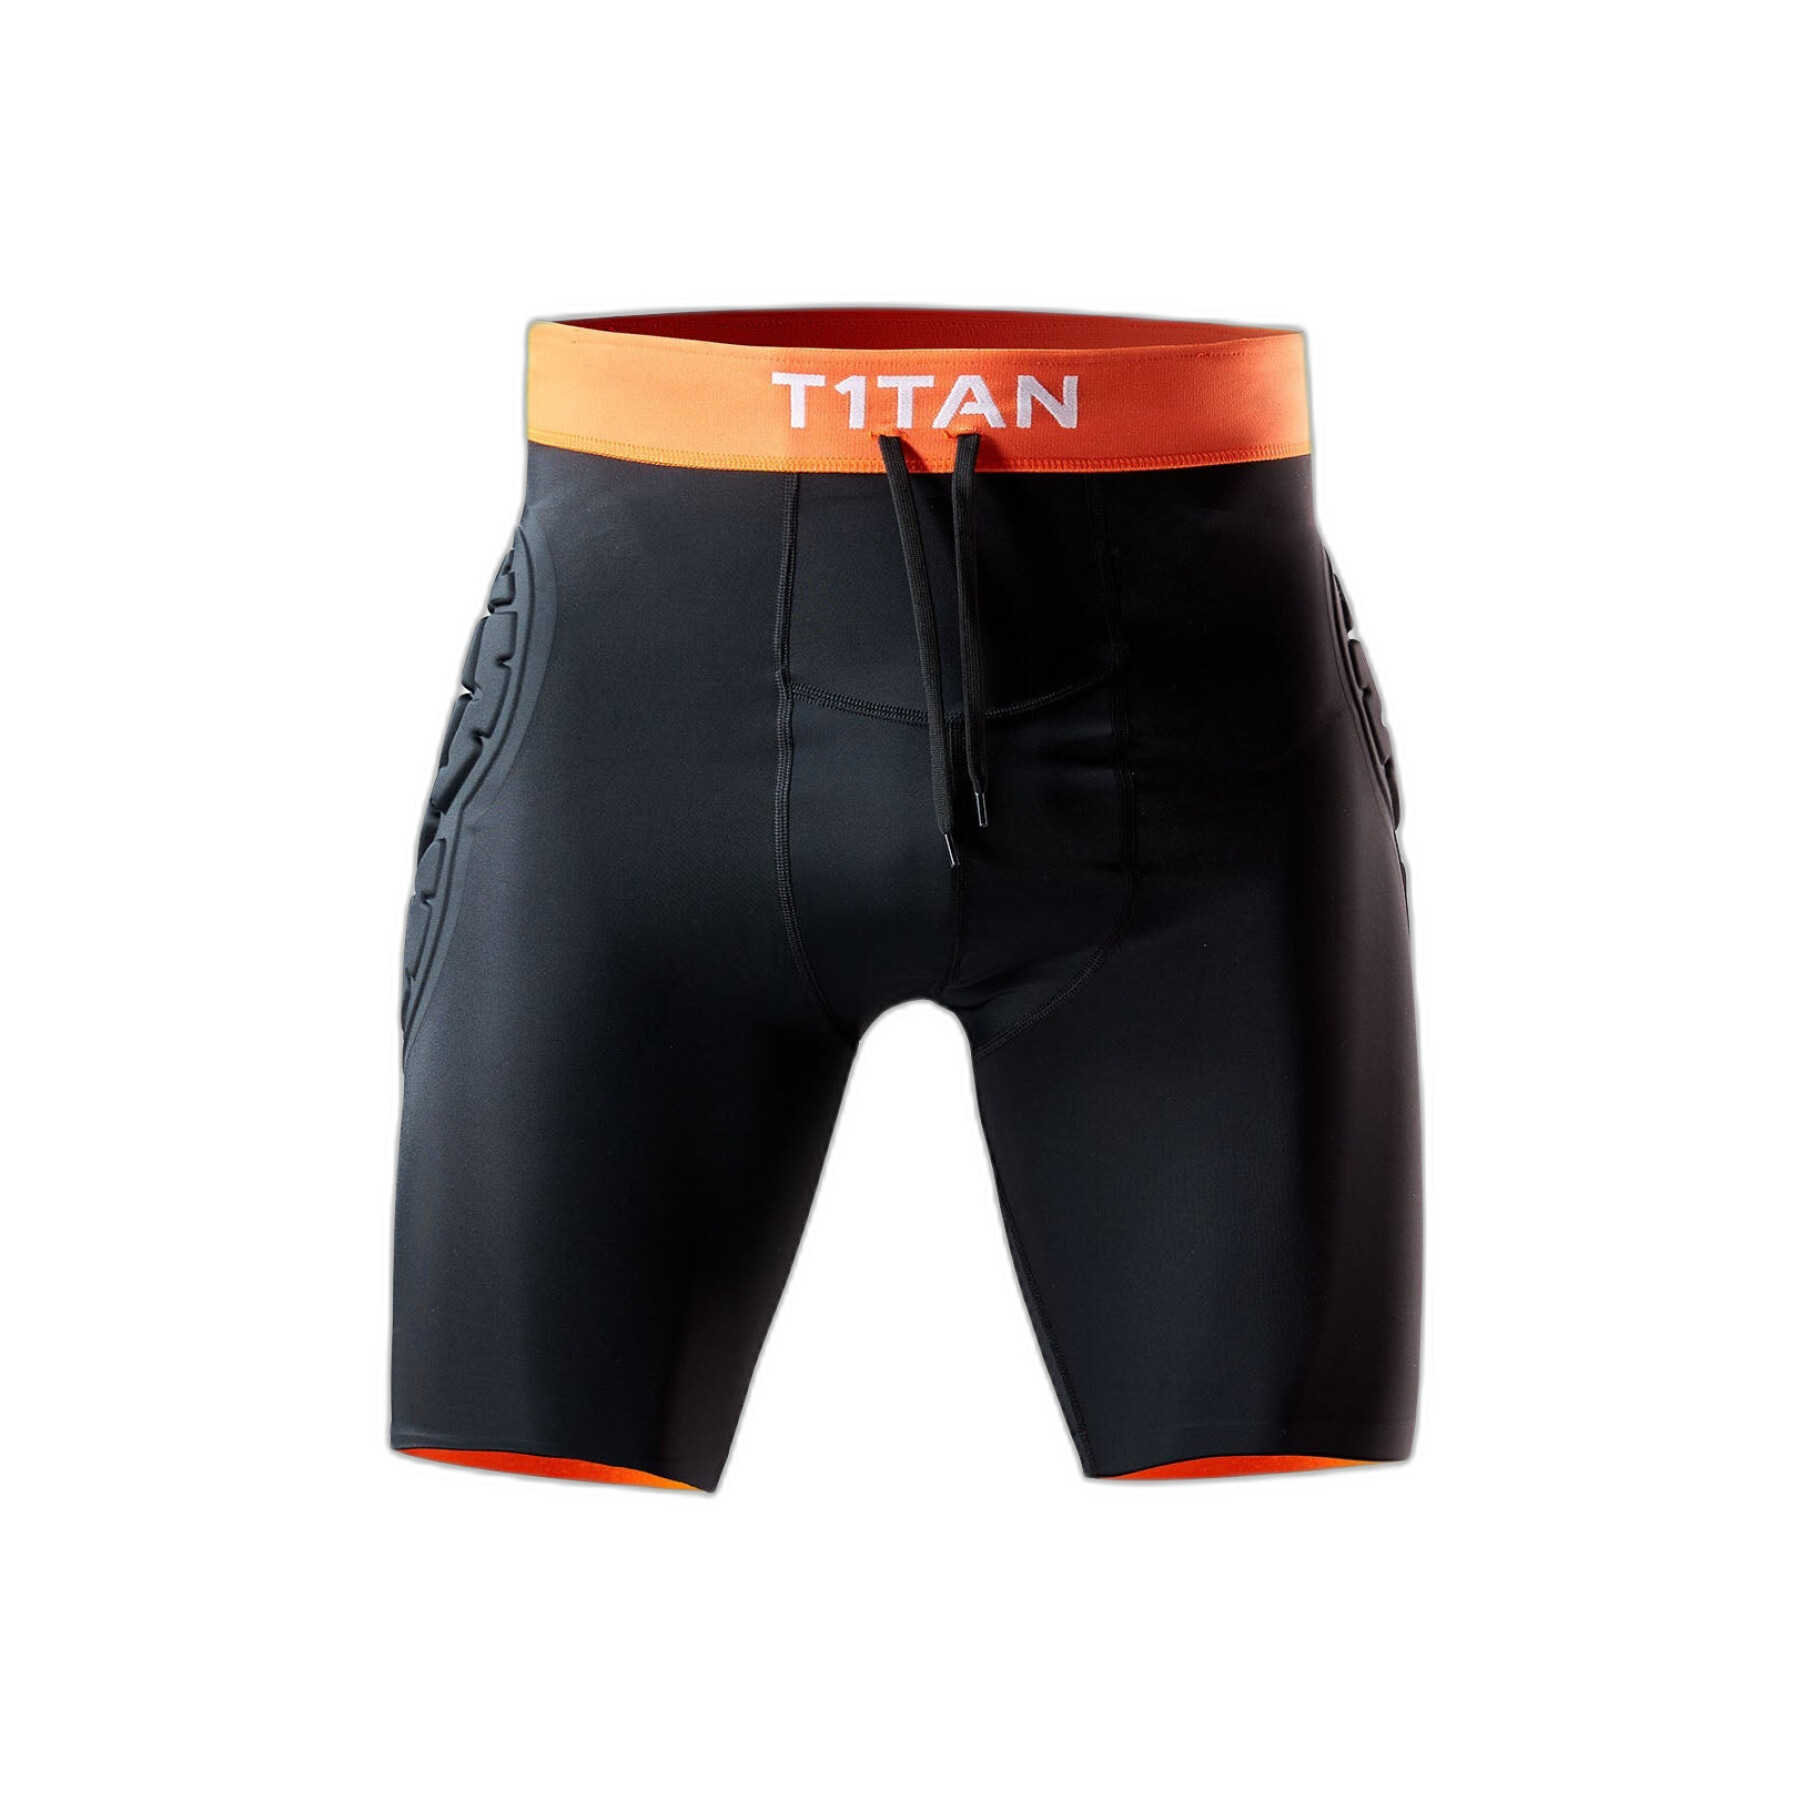 Protective shorts for goalkeepers T1TAN 2.0